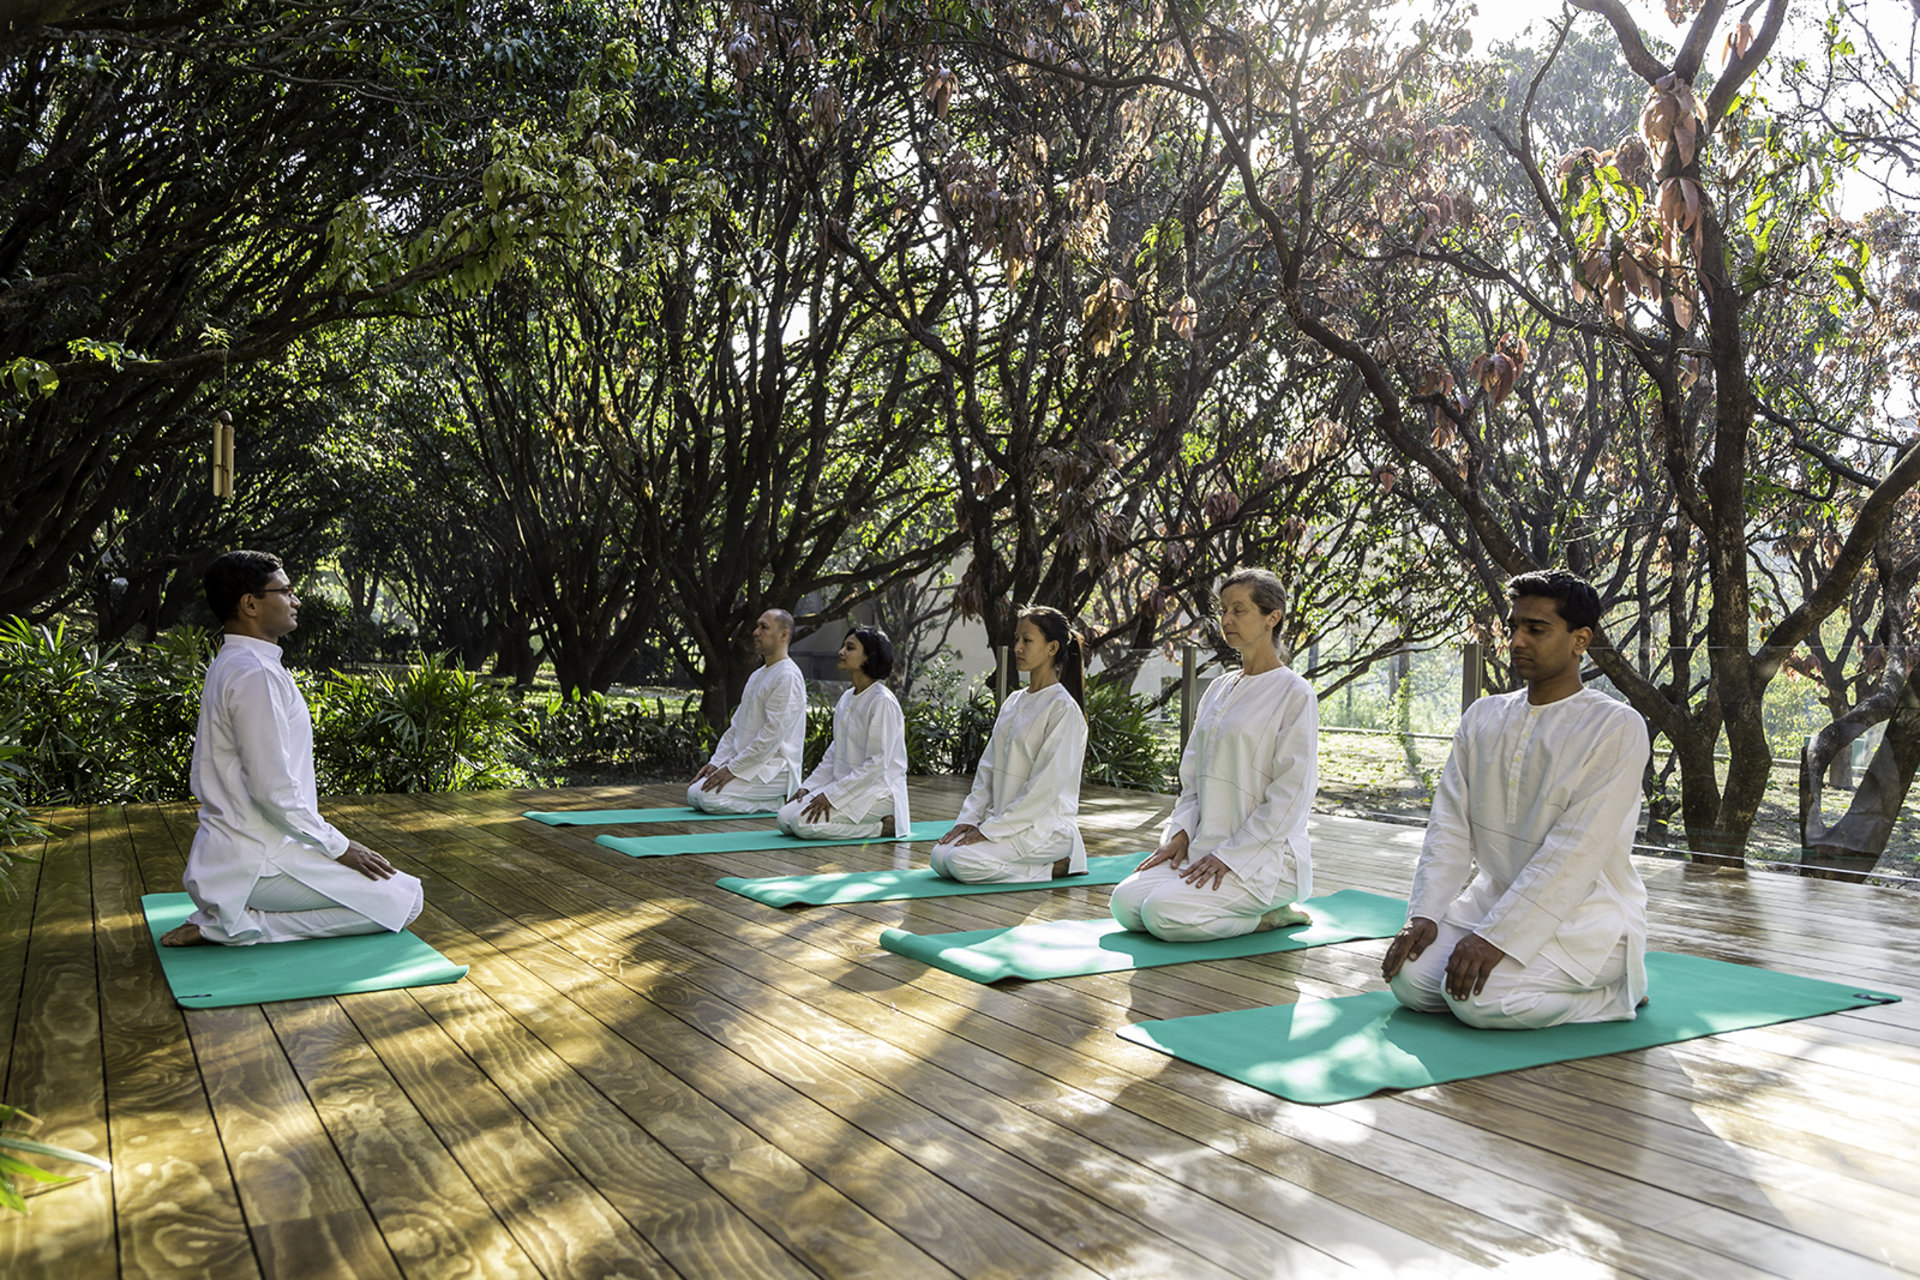 Spiritual And Wellness Retreats In India - Reconnecting With The Inner Self